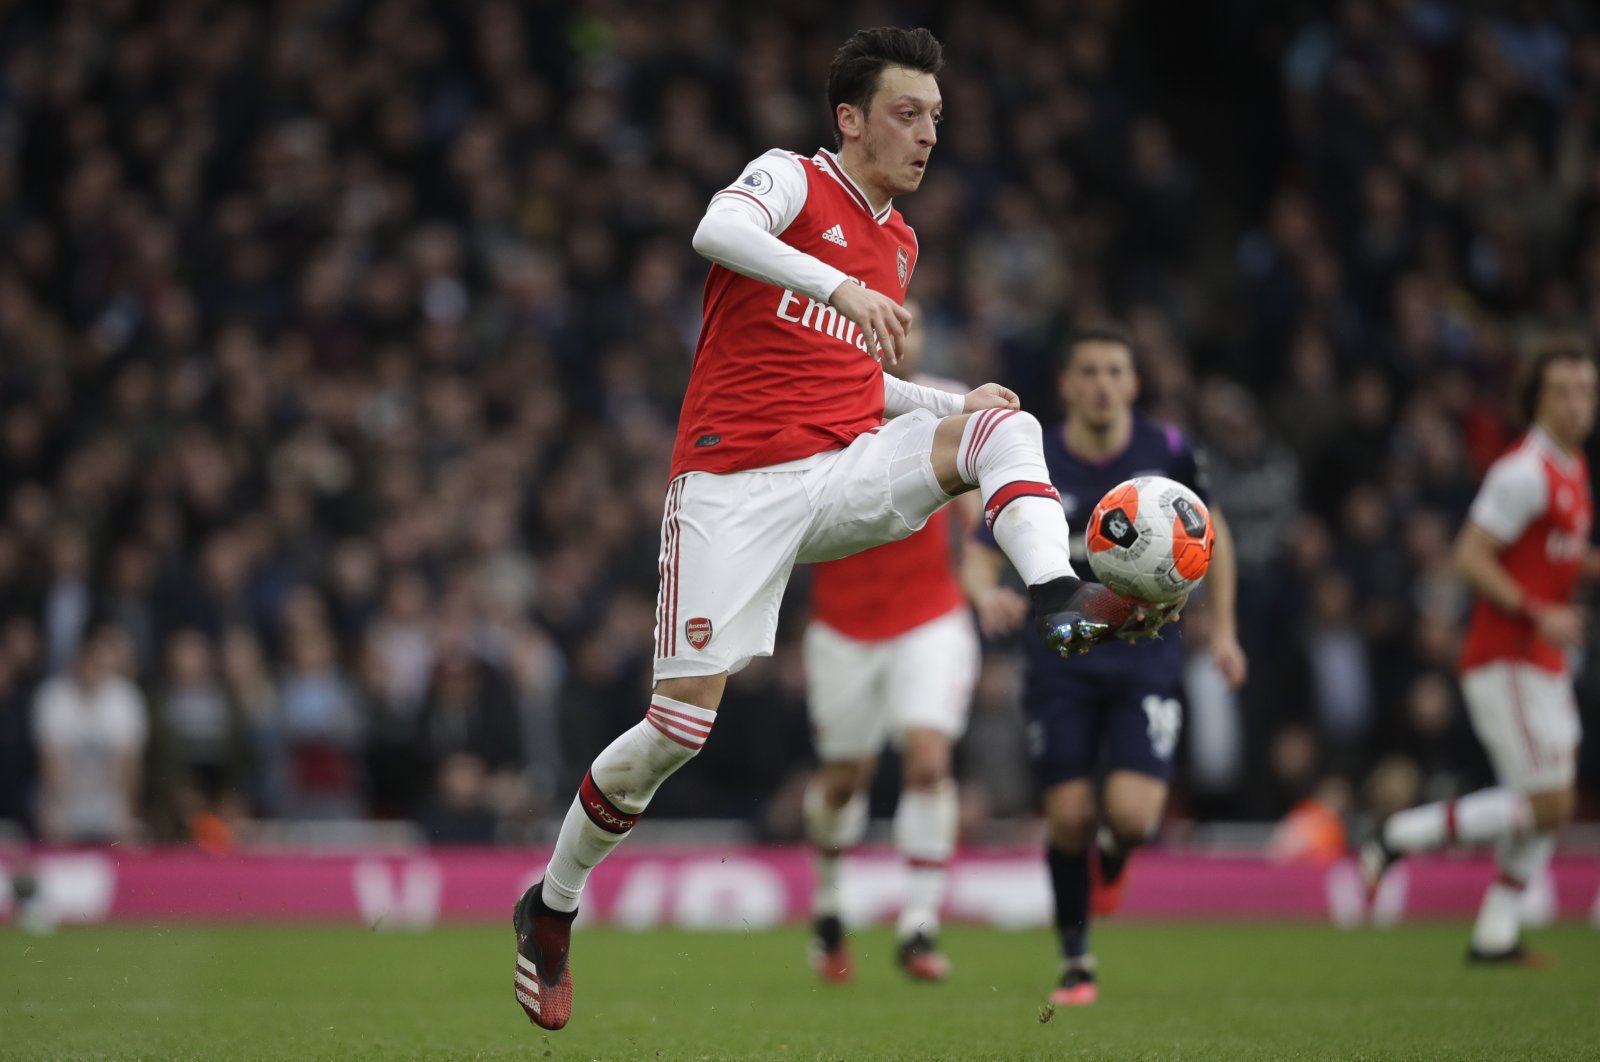 Arsenal's Mesut Özil controls the ball during a Premier League against West Ham at the Emirates Stadium, in London, Britain, March 7, 2020. (AP Photo)